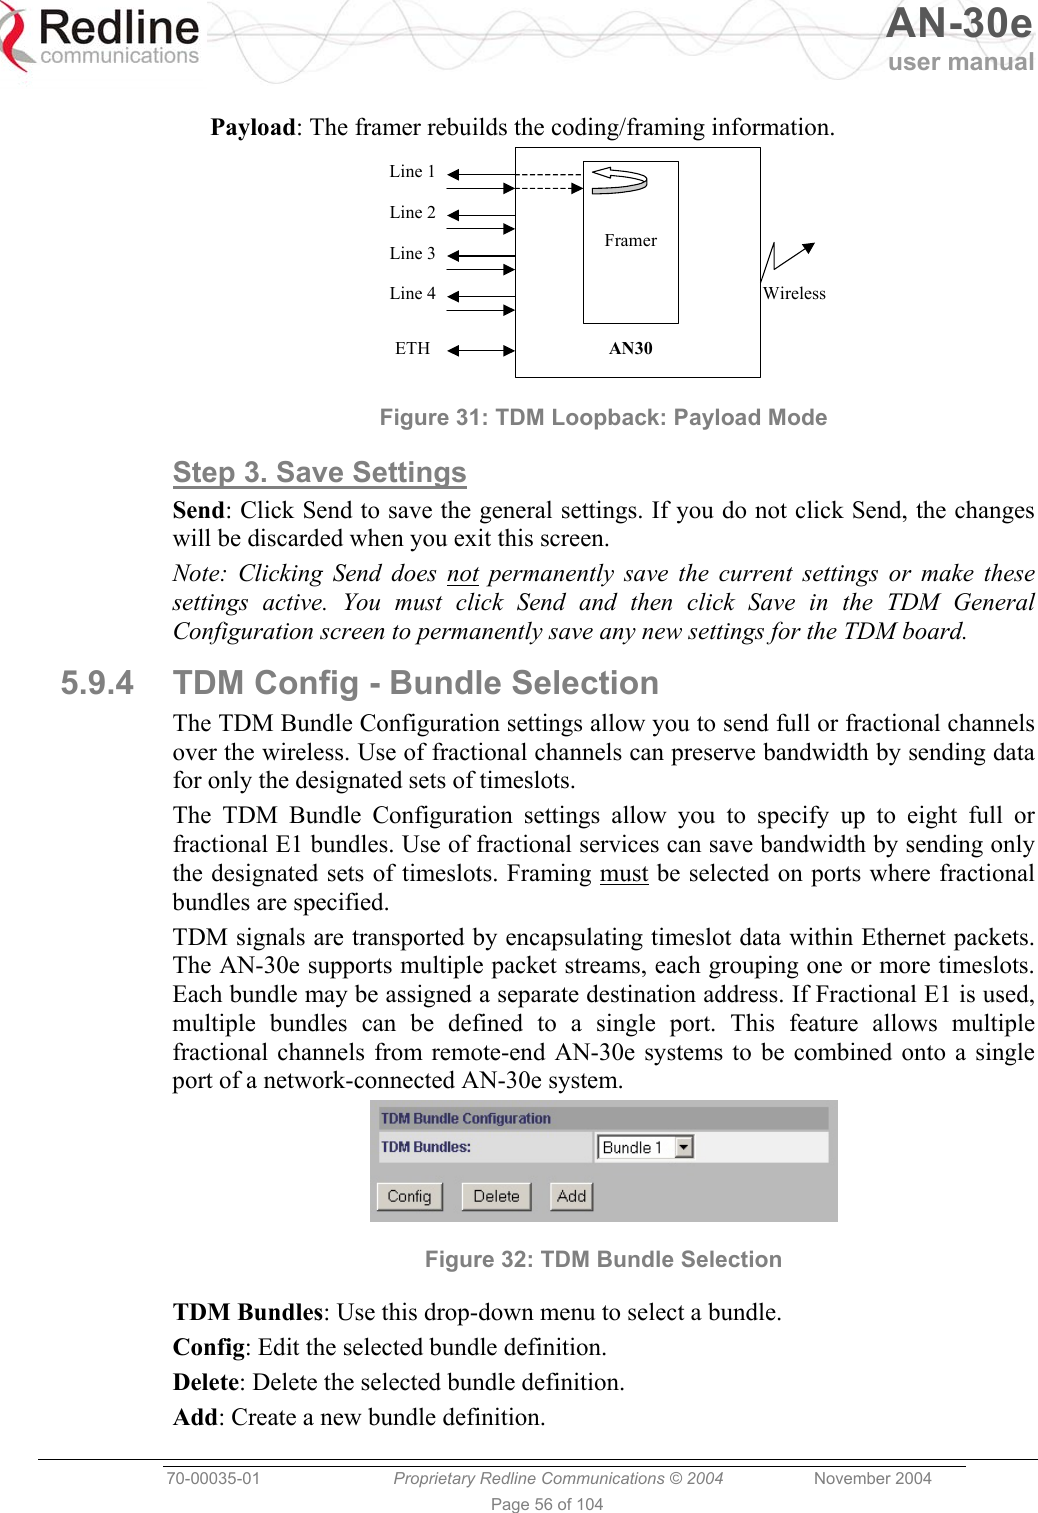   AN-30e user manual  70-00035-01  Proprietary Redline Communications © 2004 November 2004   Page 56 of 104  Payload: The framer rebuilds the coding/framing information.     Framer Line 1 Line 2 Line 3 Line 4 ETH  AN30 Wireless  Figure 31: TDM Loopback: Payload Mode Step 3. Save Settings Send: Click Send to save the general settings. If you do not click Send, the changes will be discarded when you exit this screen. Note: Clicking Send does not permanently save the current settings or make these settings active. You must click Send and then click Save in the TDM General Configuration screen to permanently save any new settings for the TDM board. 5.9.4  TDM Config - Bundle Selection The TDM Bundle Configuration settings allow you to send full or fractional channels over the wireless. Use of fractional channels can preserve bandwidth by sending data for only the designated sets of timeslots. The TDM Bundle Configuration settings allow you to specify up to eight full or fractional E1 bundles. Use of fractional services can save bandwidth by sending only the designated sets of timeslots. Framing must be selected on ports where fractional bundles are specified. TDM signals are transported by encapsulating timeslot data within Ethernet packets. The AN-30e supports multiple packet streams, each grouping one or more timeslots. Each bundle may be assigned a separate destination address. If Fractional E1 is used, multiple bundles can be defined to a single port. This feature allows multiple fractional channels from remote-end AN-30e systems to be combined onto a single port of a network-connected AN-30e system.  Figure 32: TDM Bundle Selection TDM Bundles: Use this drop-down menu to select a bundle. Config: Edit the selected bundle definition. Delete: Delete the selected bundle definition. Add: Create a new bundle definition. 